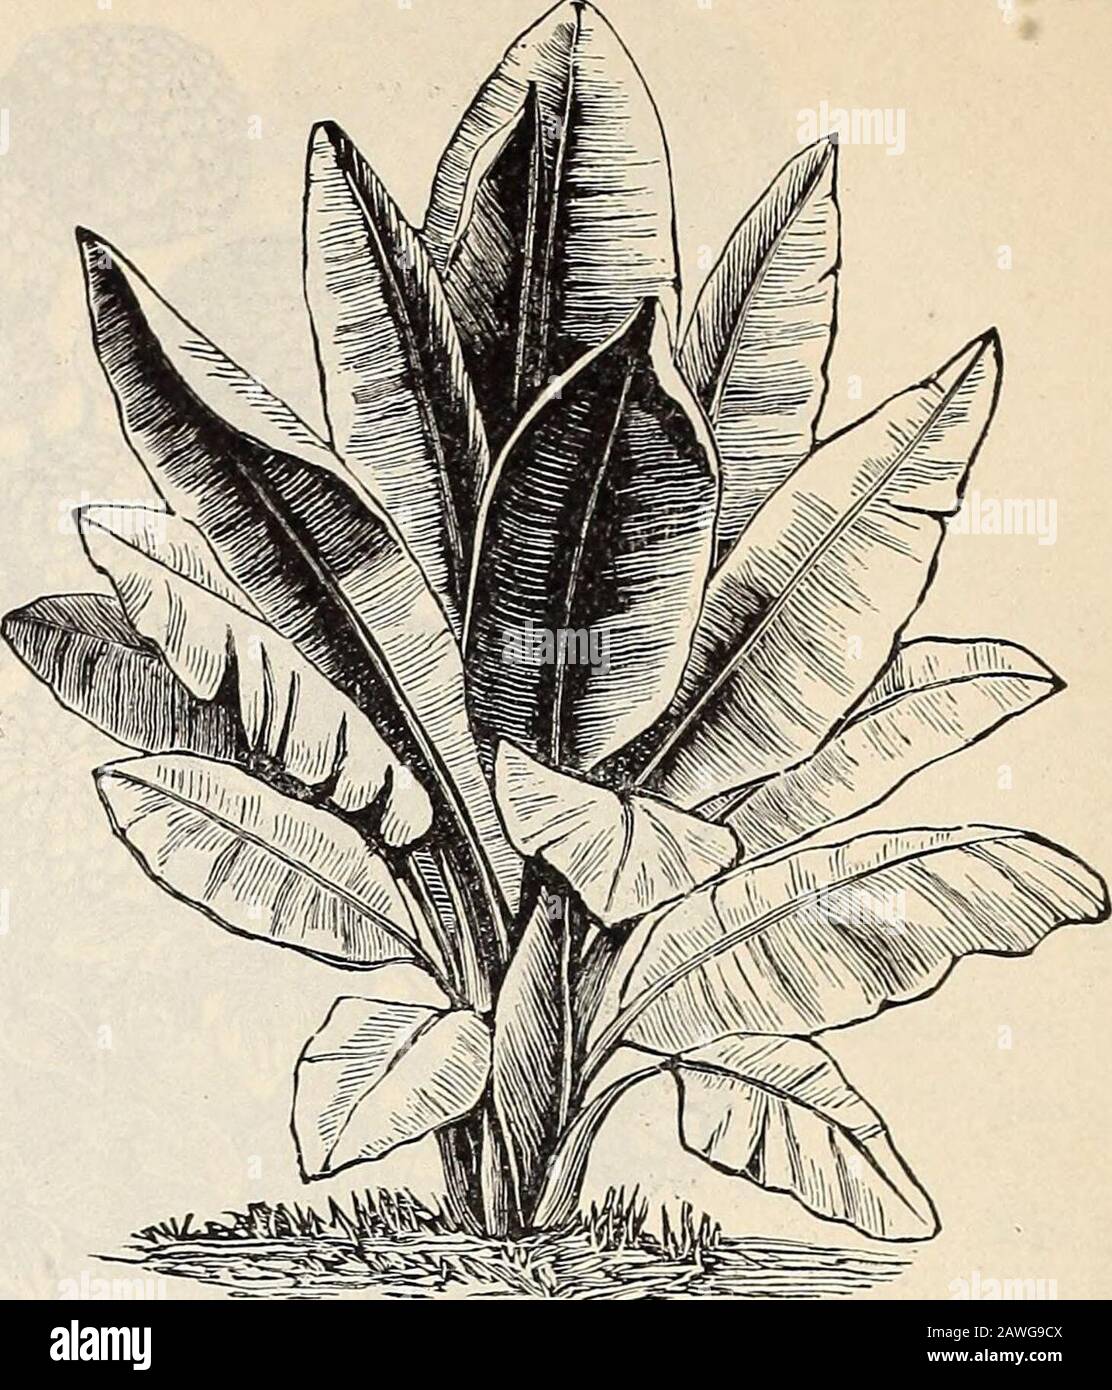 R& JFarquhar and Co'scatalogue, 1897 : reliable tested seeds plants, bulbs fertilizers tools, etc. . Arundo Donax Variegata. Tall and stately ; per-ennial. Seven feet 10 8480 Briza Gracilis. (Small Quaking=Qrass.) One ft. .058485 — Maxima. (Quaking Grass.) Annual, One ft. .058490 Bromus Brizeeformis. Elegant, large, drooping panicles; splendid; perennial. One-and-a-half foot .058495 Chloris Truncata. Silvery; annual. Two feet . .058500 Coix Lachryma. (Jobs Tears.) Annual. Oz., .30 .058505 Erianthus Ravennae Variegata. Elegant forlawn specimens, with beautiful foliage and large,# graceful plume Stock Photo